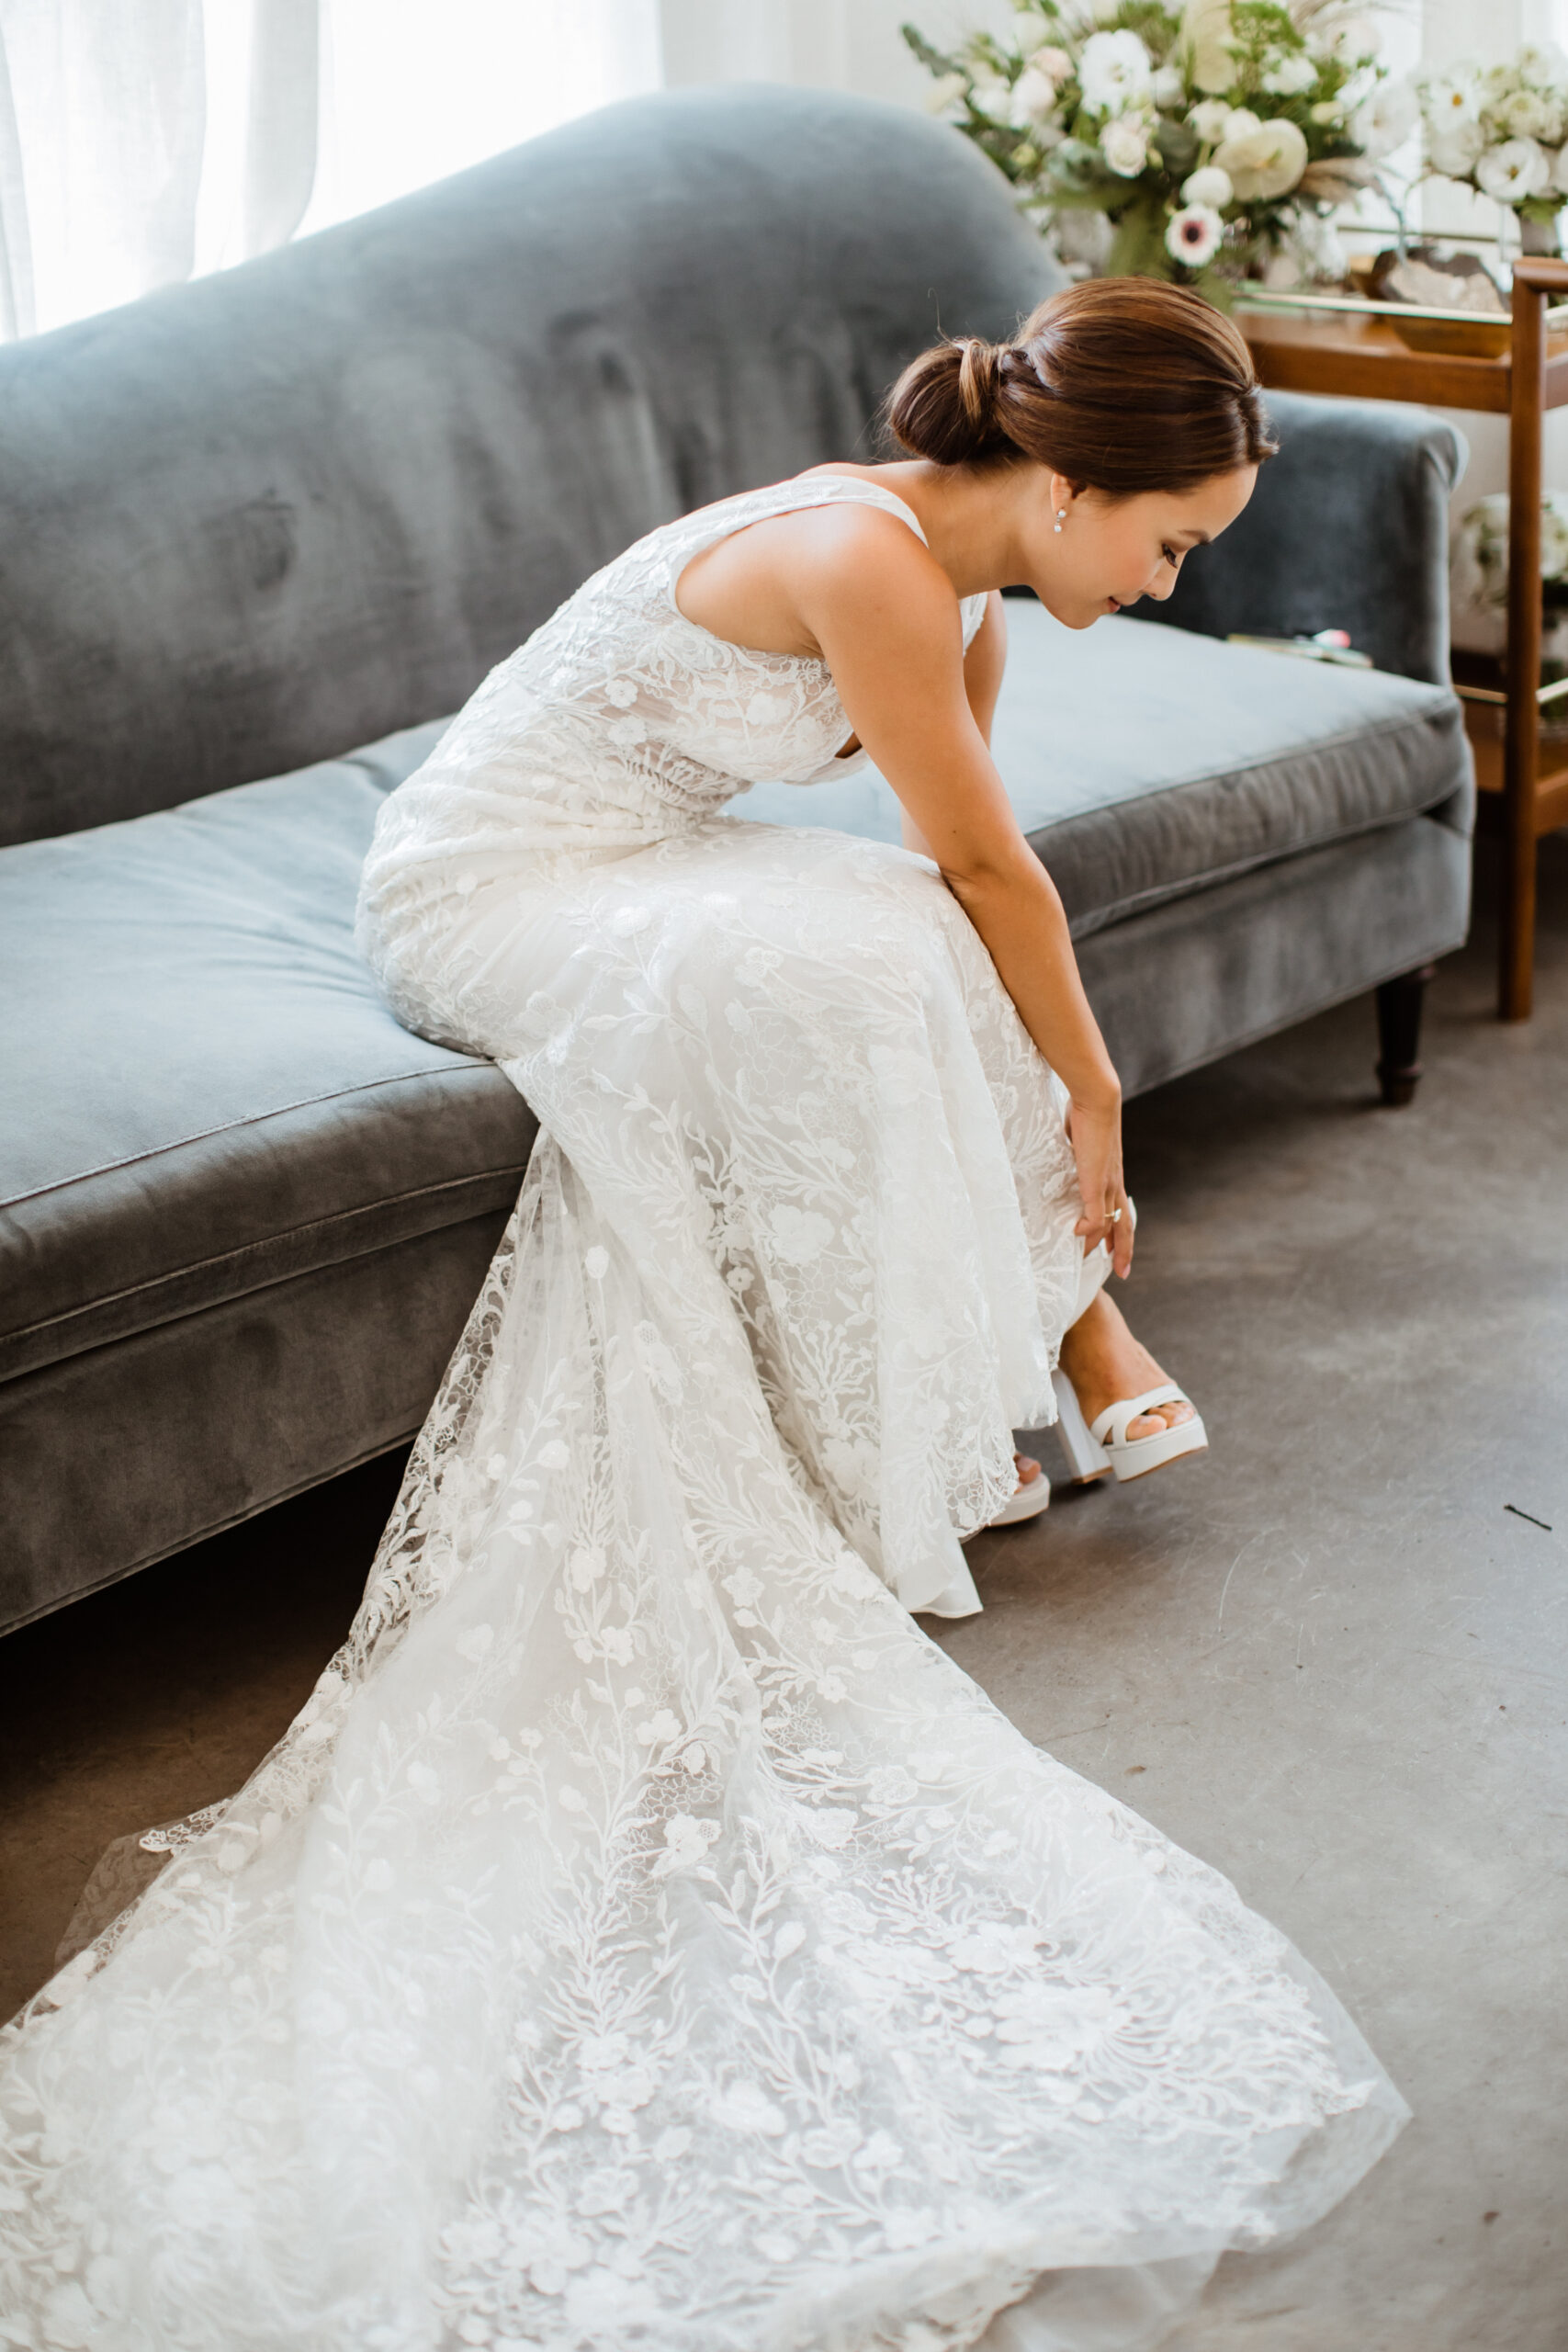 Beautiful bride prepares for her dreamy upstate New York wedding day